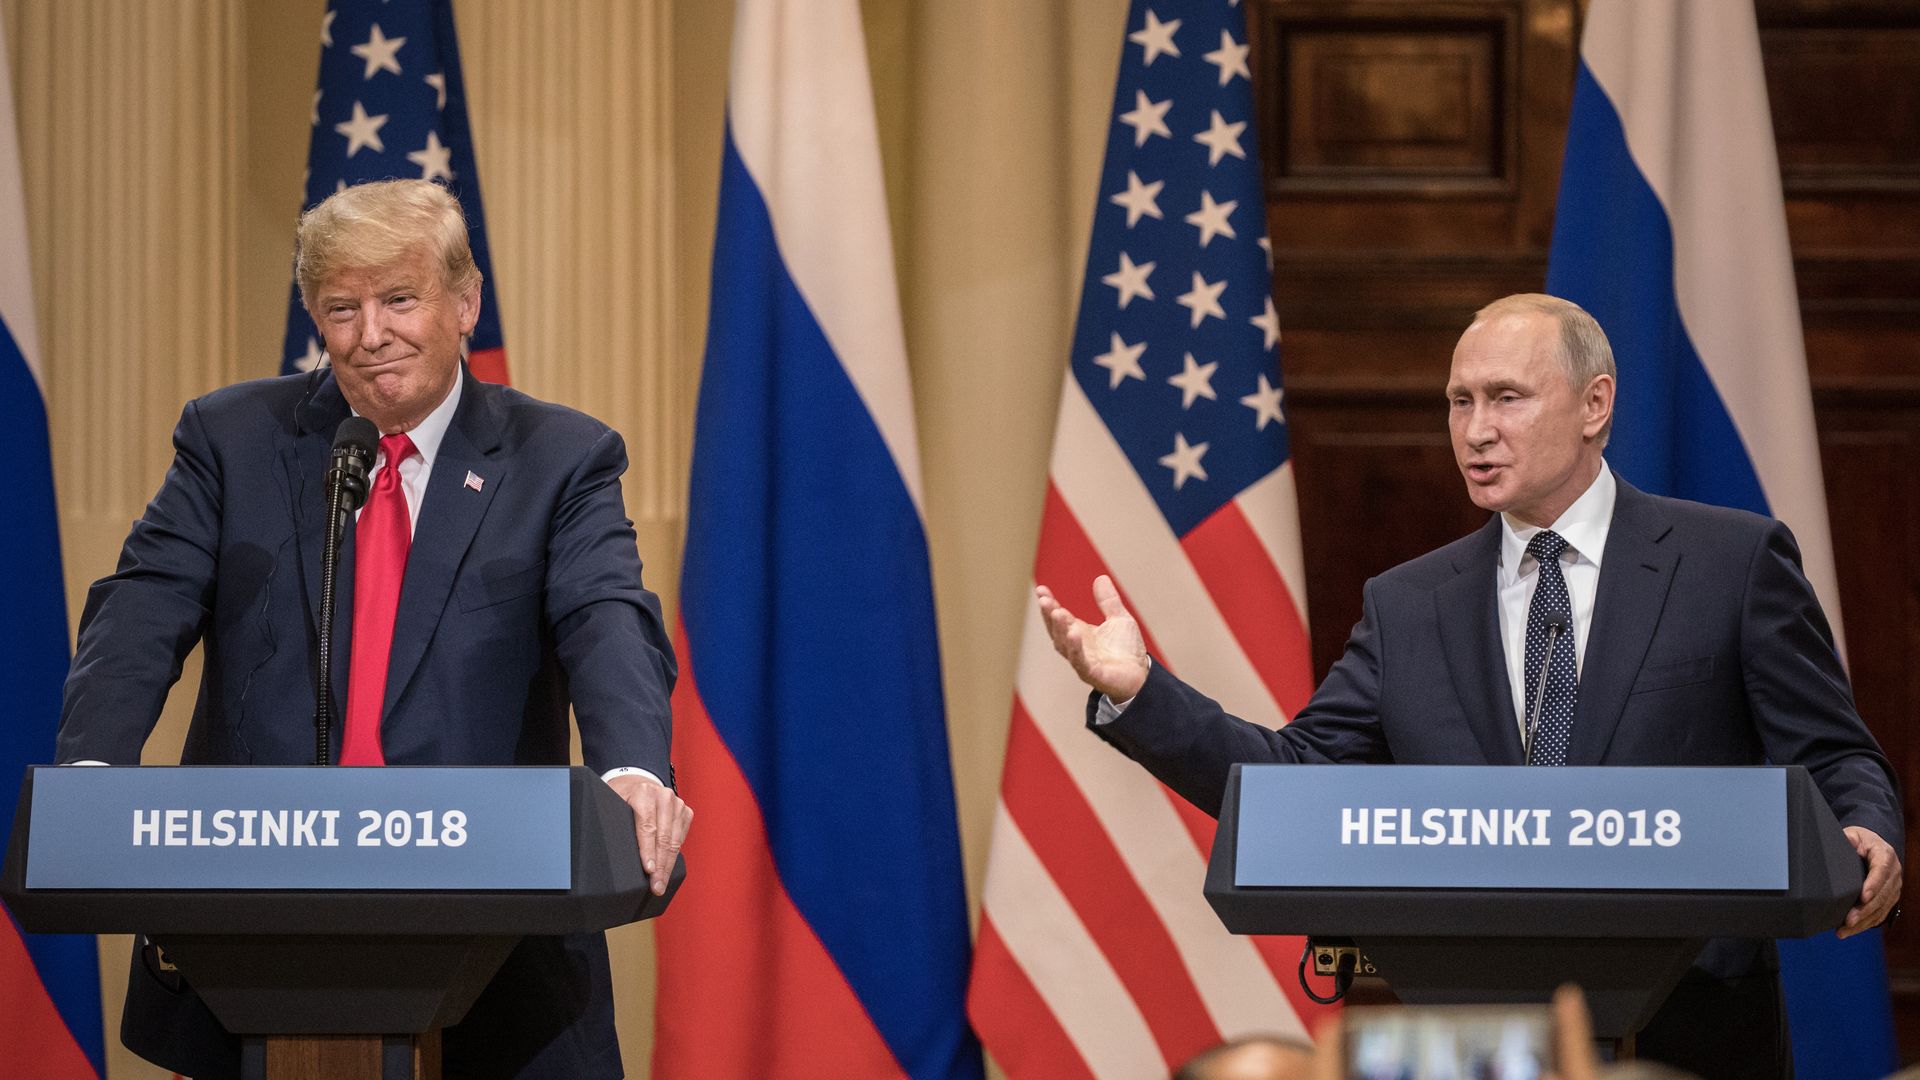 Trump and Putin in Helsinki at podiums speaking.